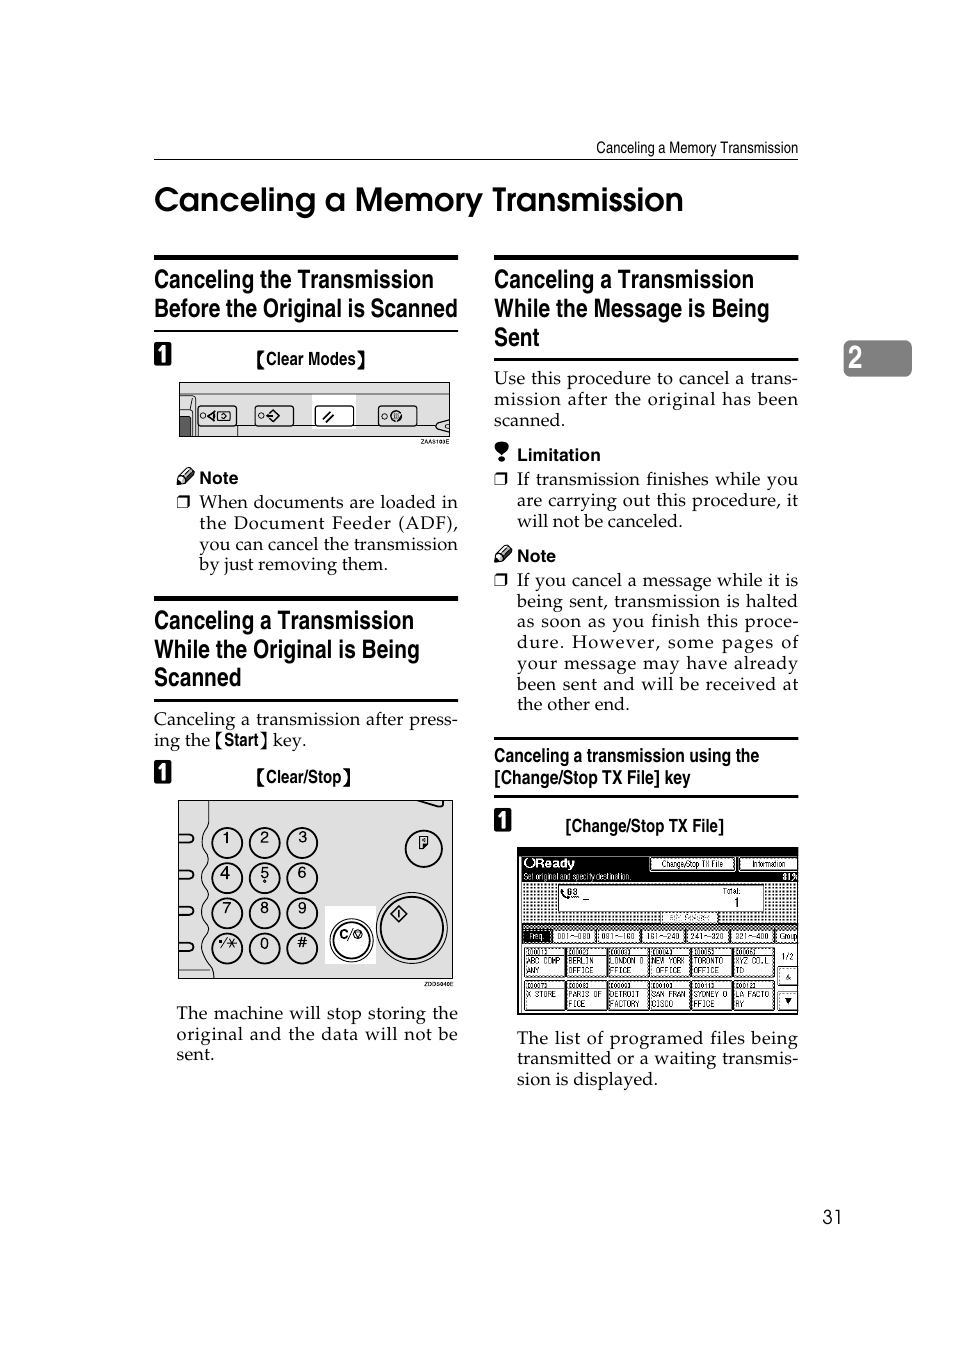 Canceling a memory transmission | LG Option Type 1045 User Manual | Page 39 / 89